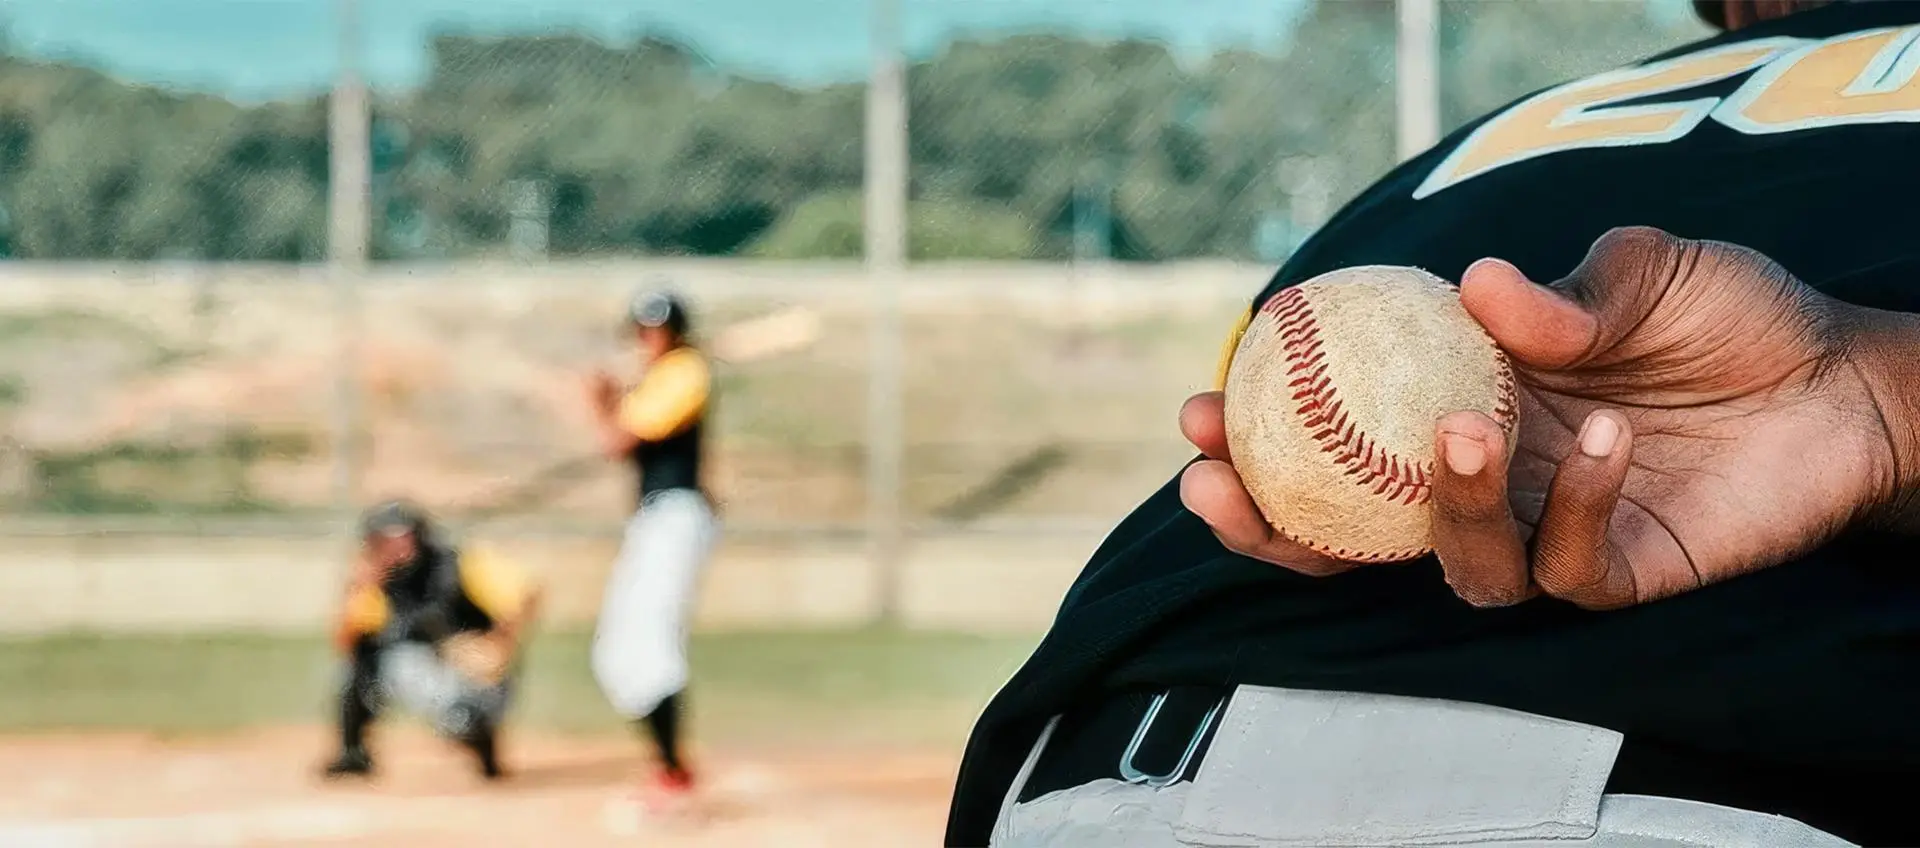 A baseball player holding a ball in his hand.